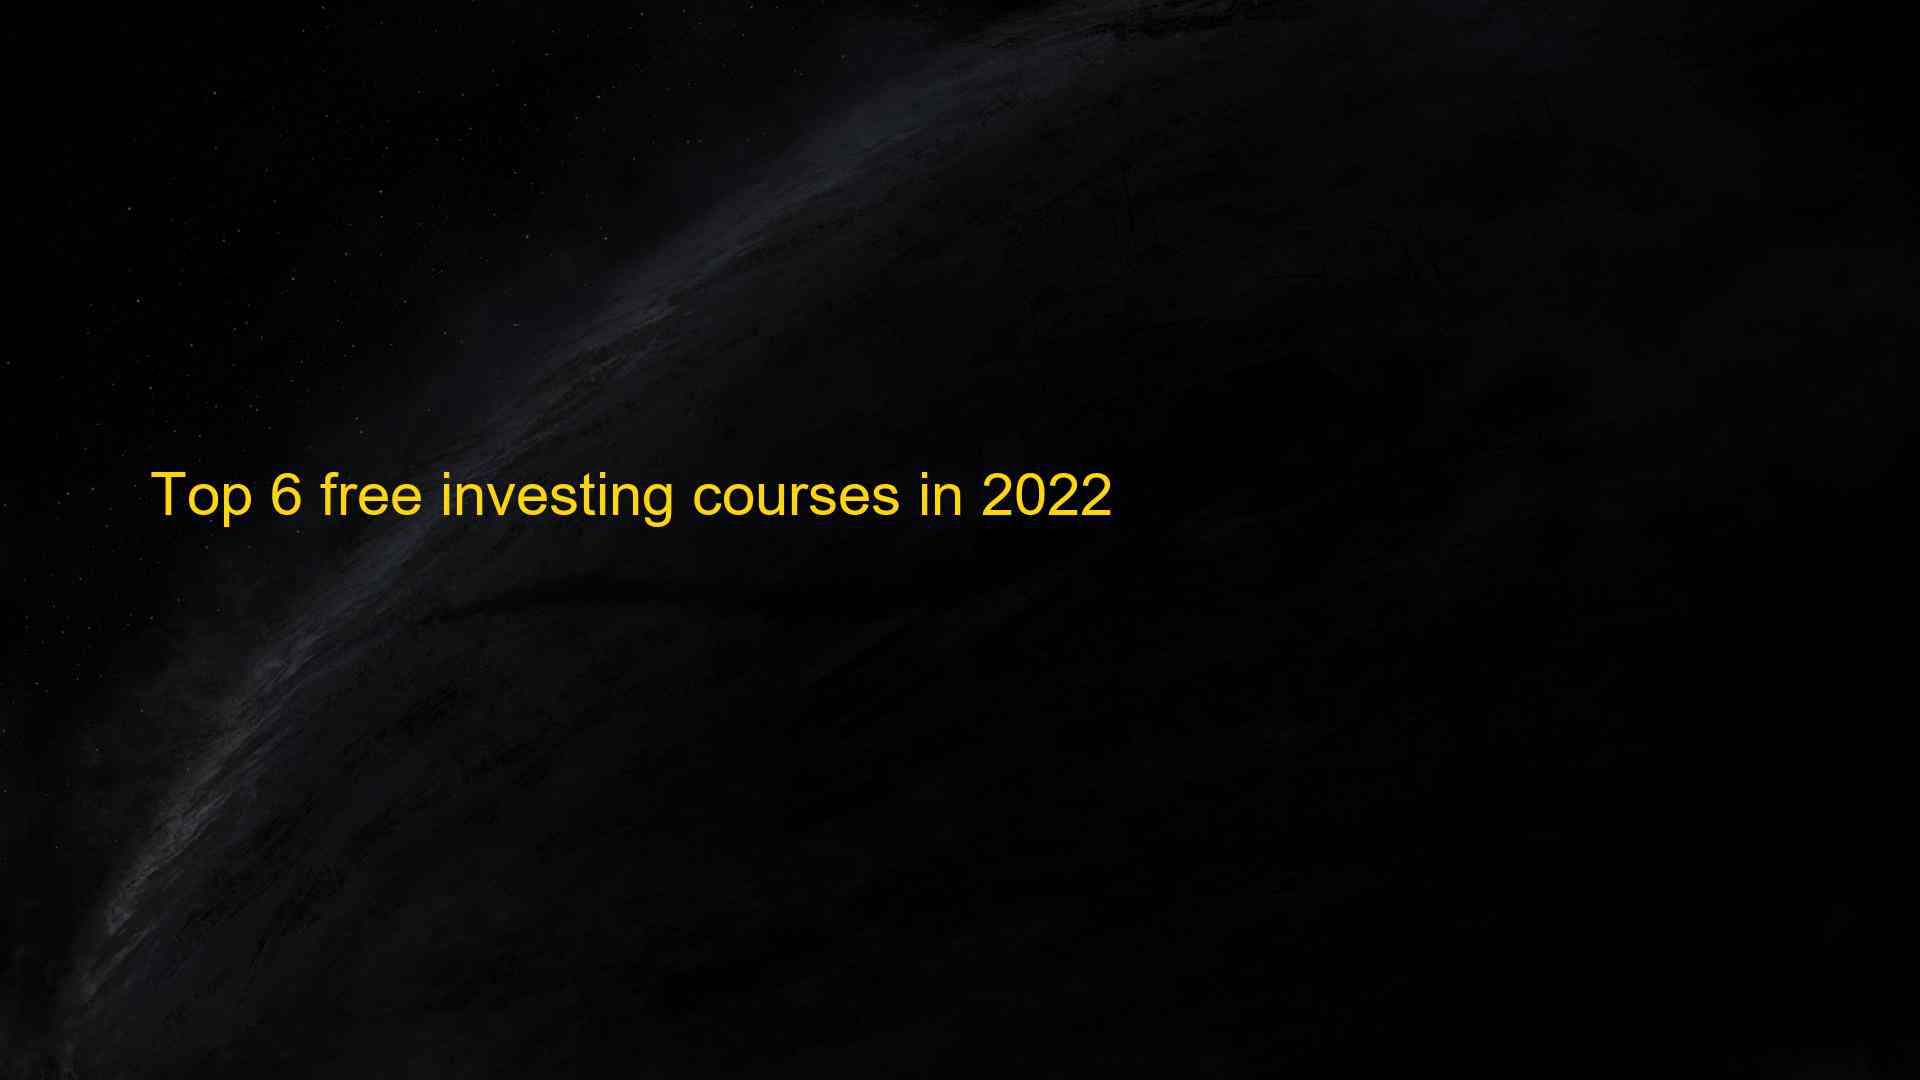 Top 6 free investing courses in 2022 1661609404